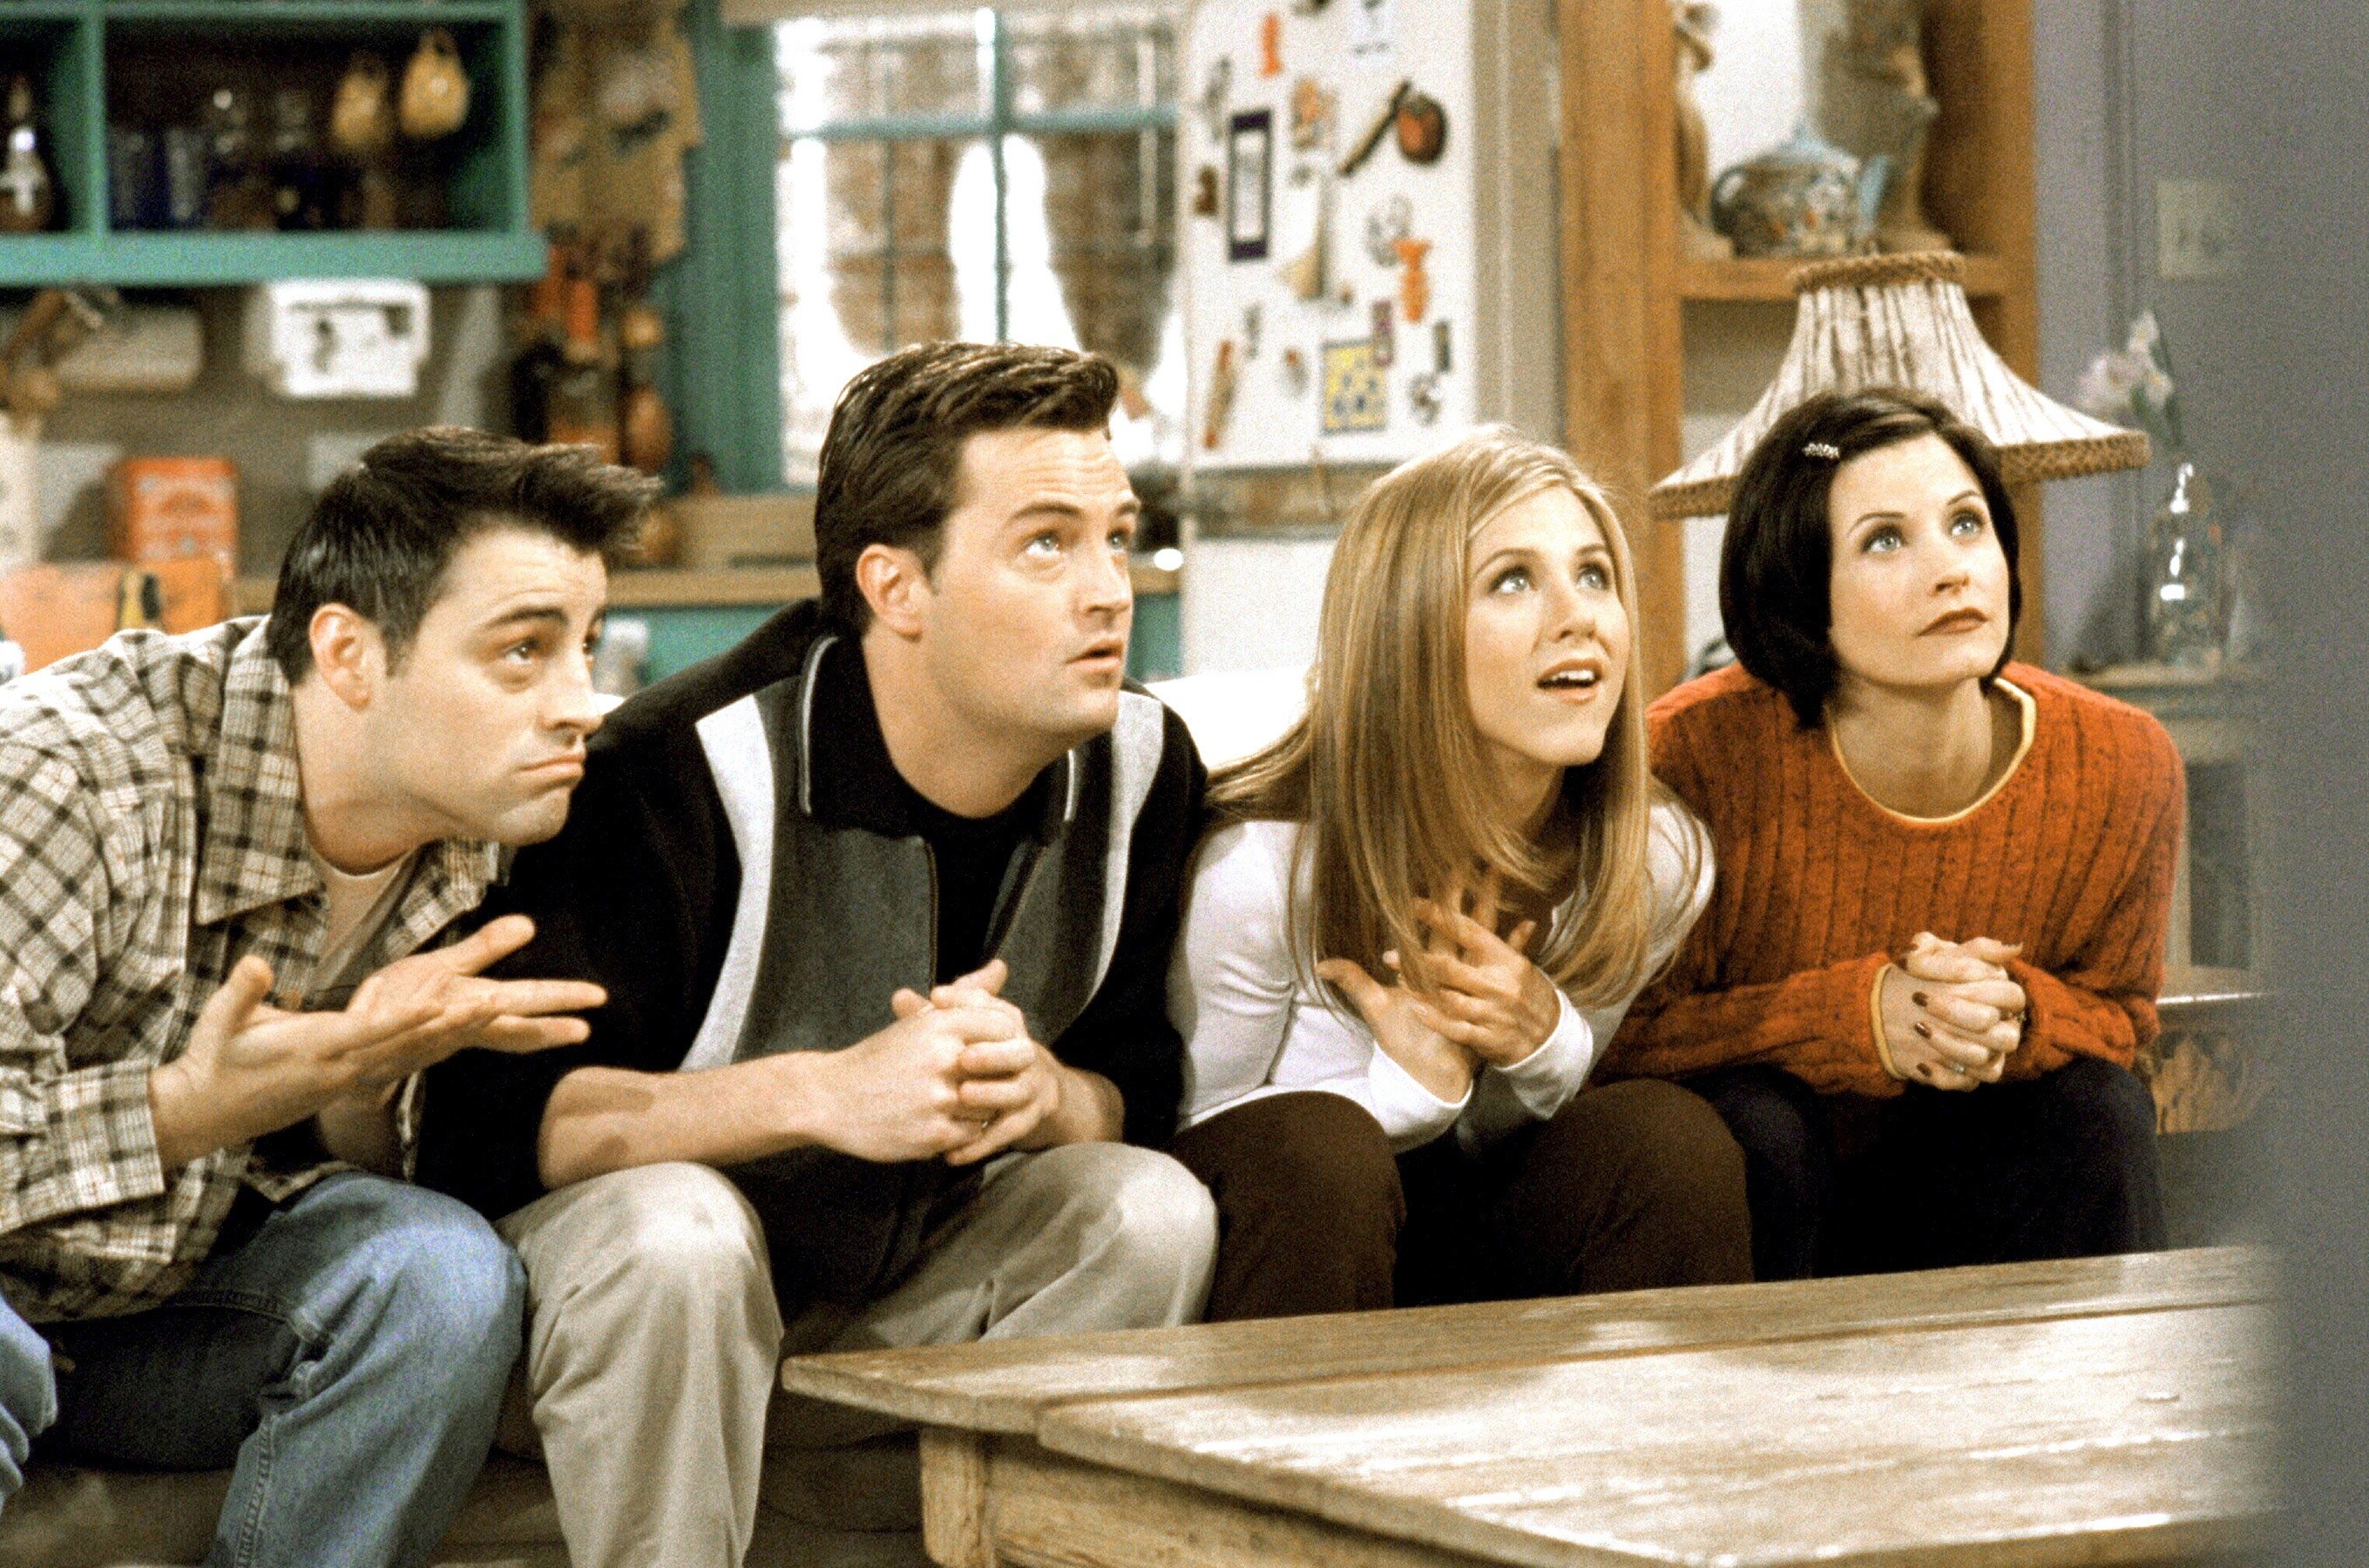 The cast of &quot;Friends&quot; all watching TV during a scene